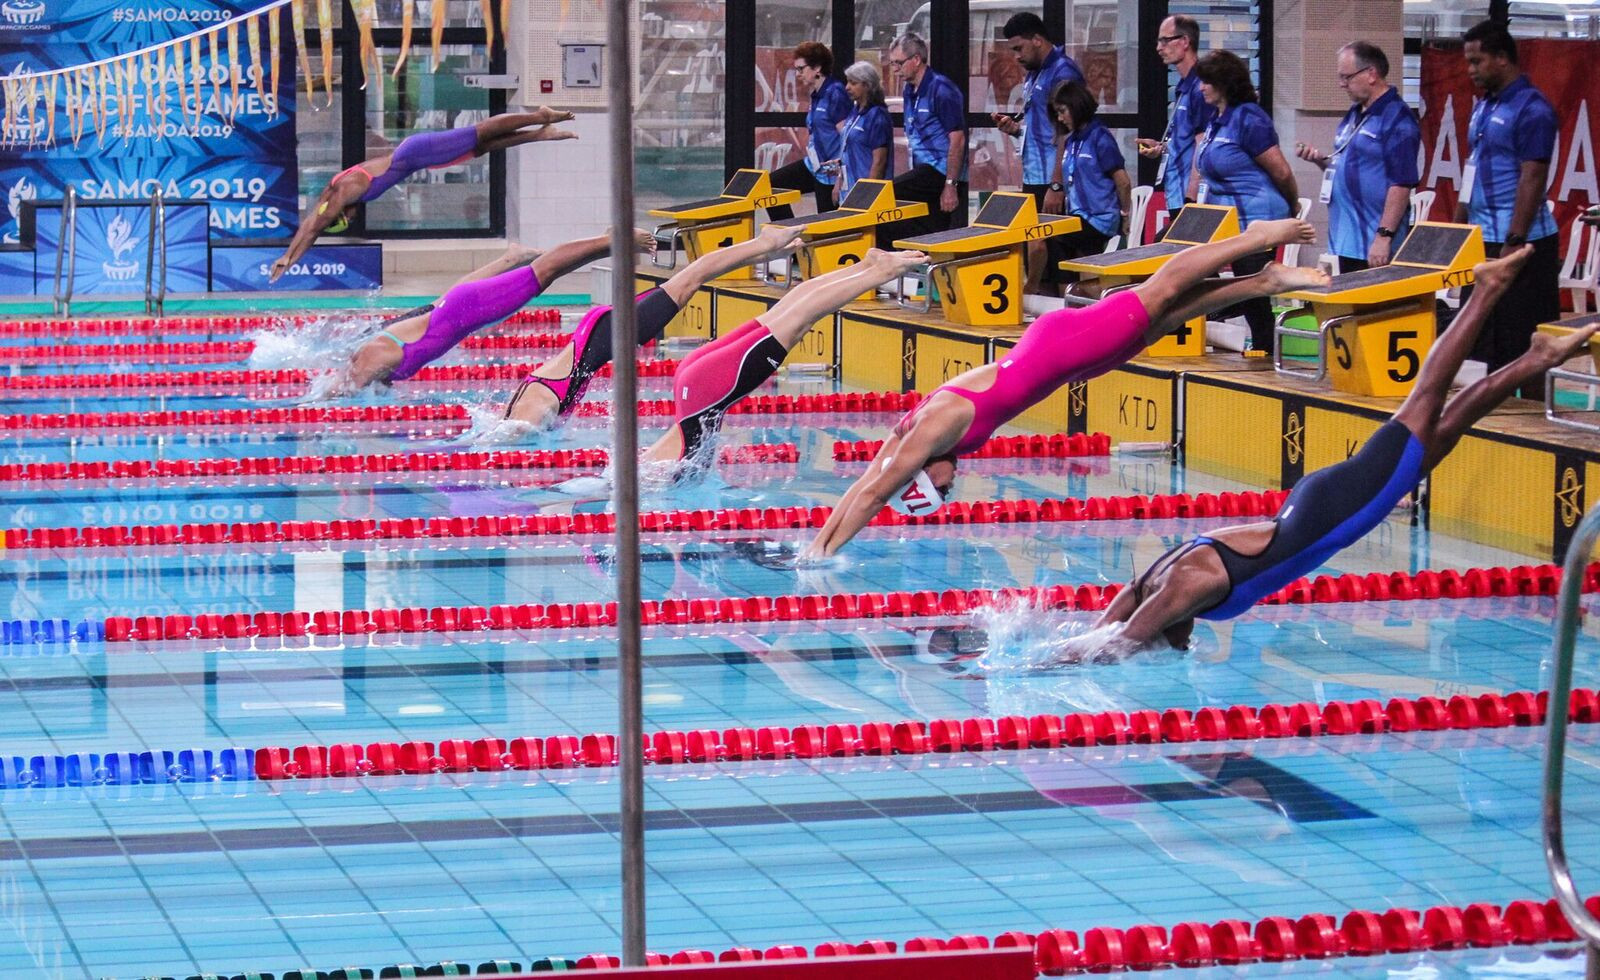 A full week of swimming action also drew to a close on Saturday ©Samoa 2019